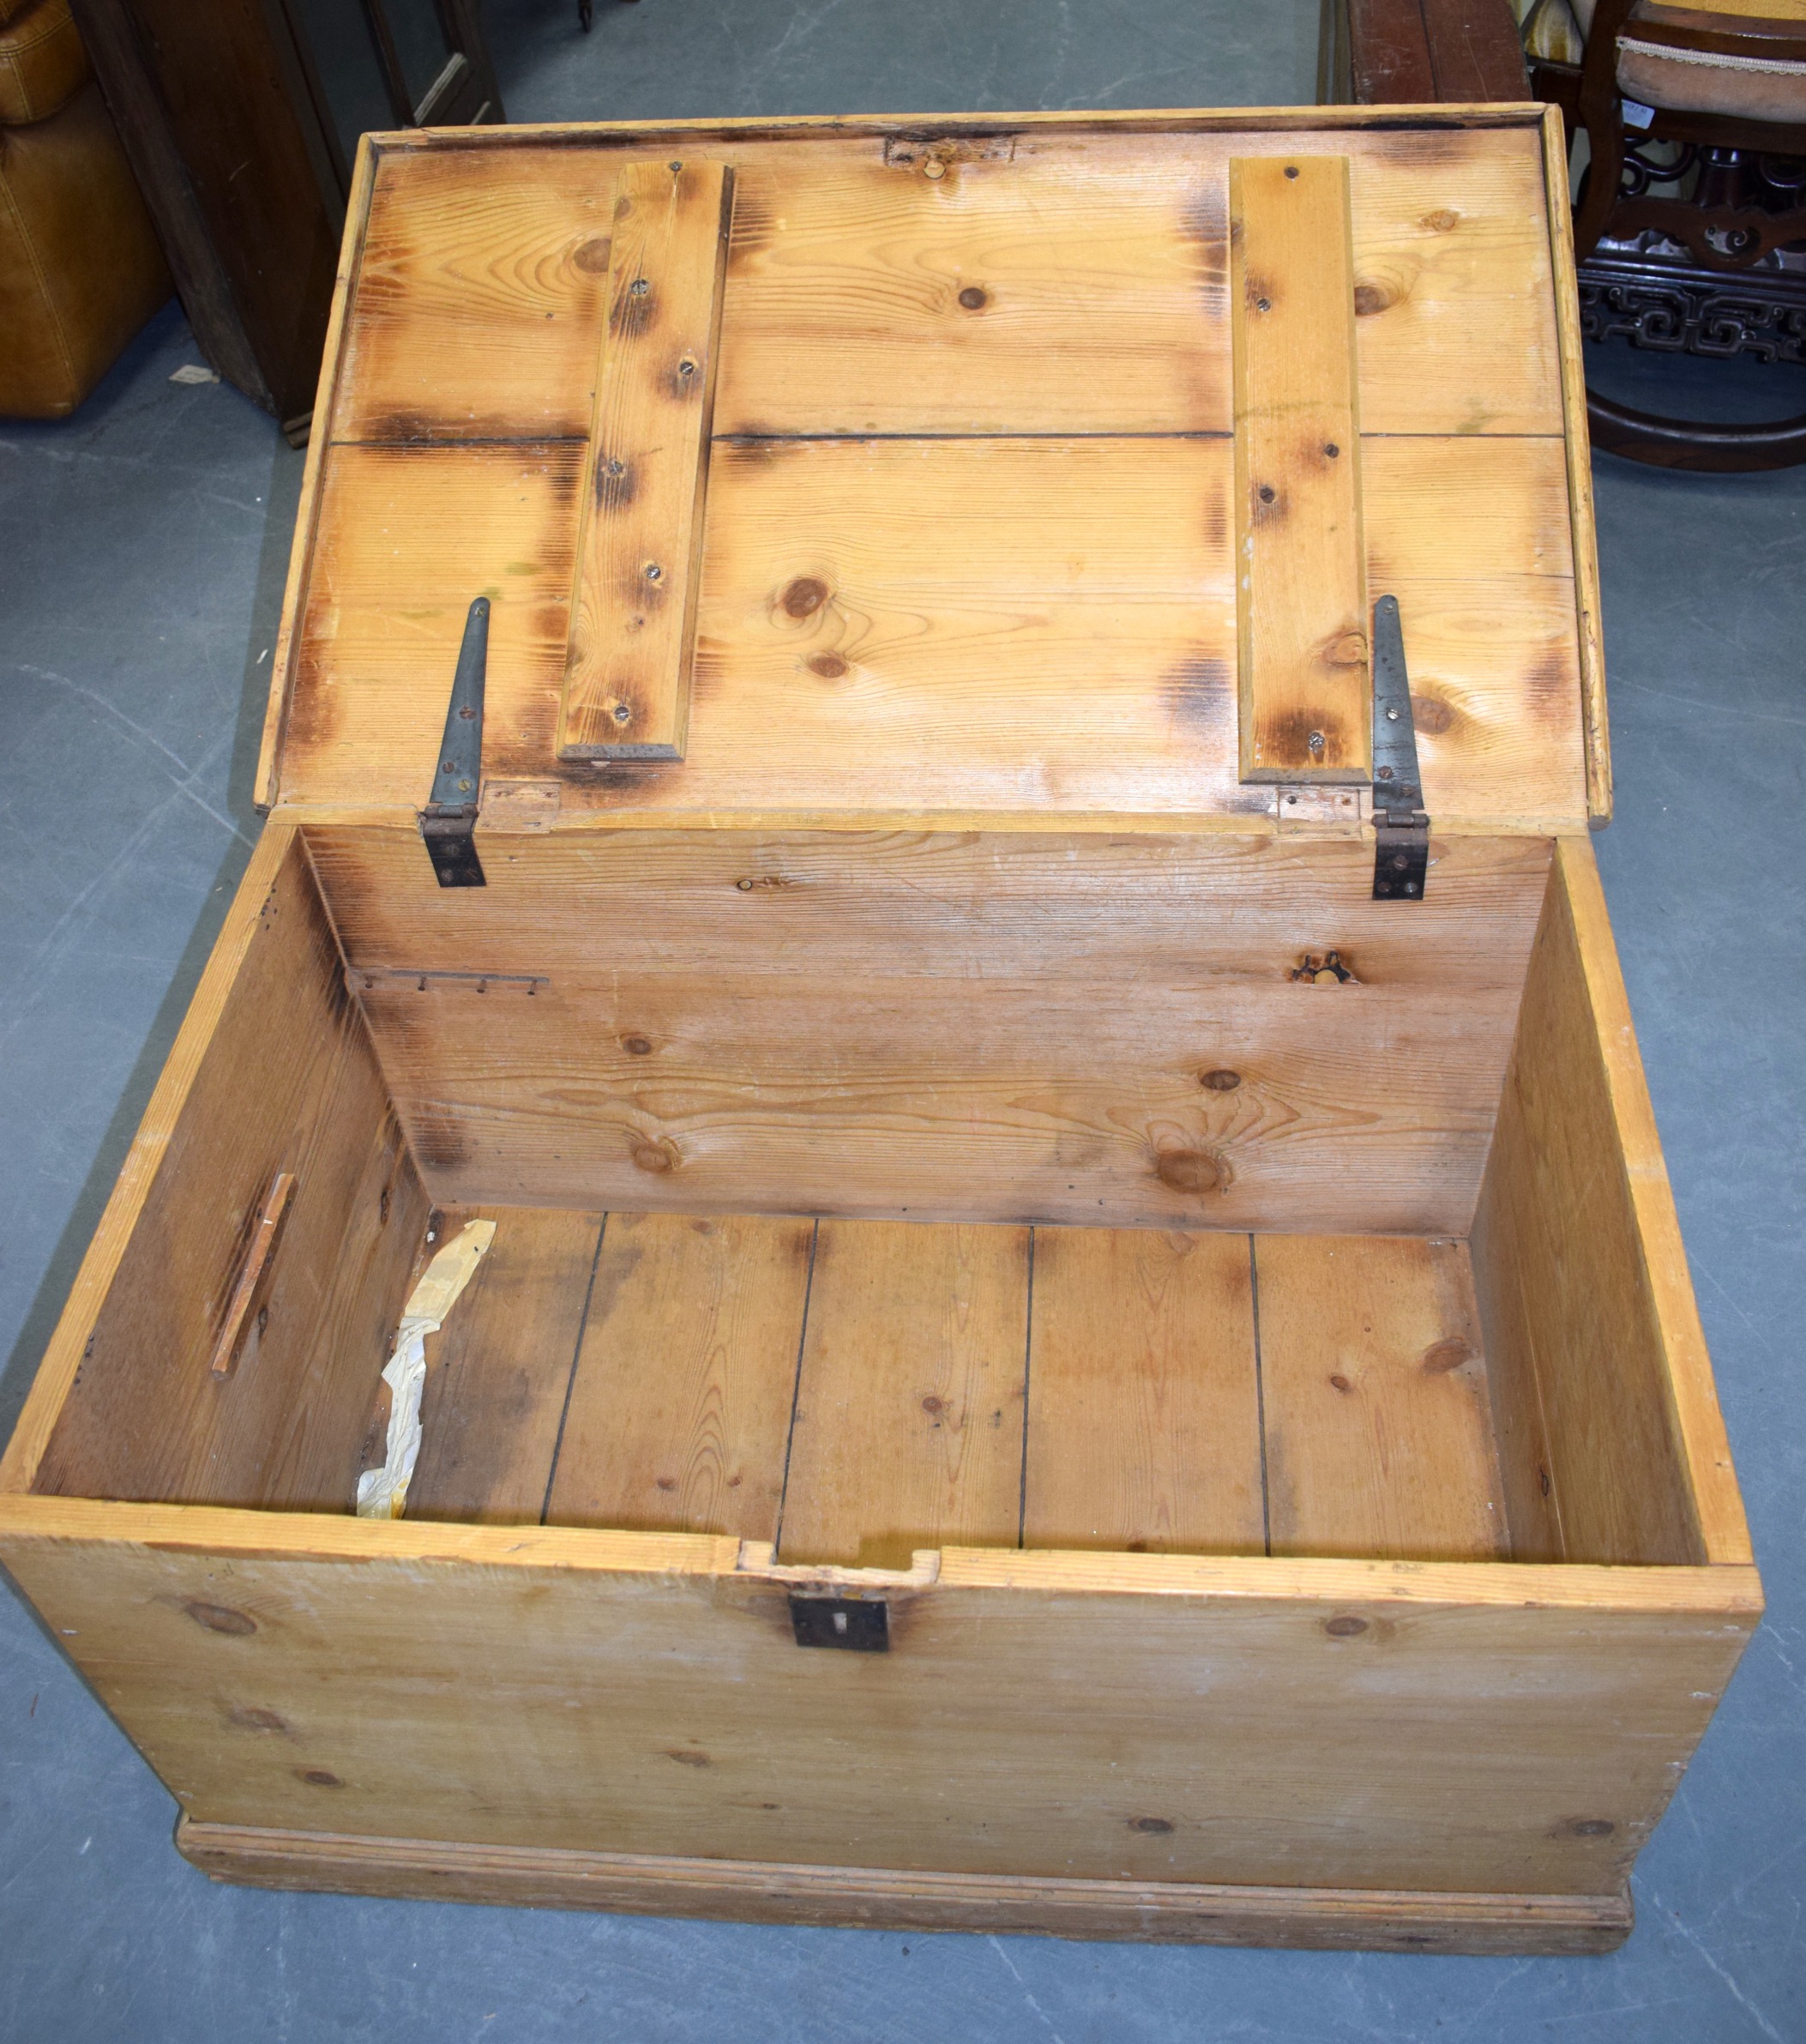 AN ANTIQUE PINE CHEST, of plain form with iron handles. 45 cm x 88 cm. - Image 3 of 3